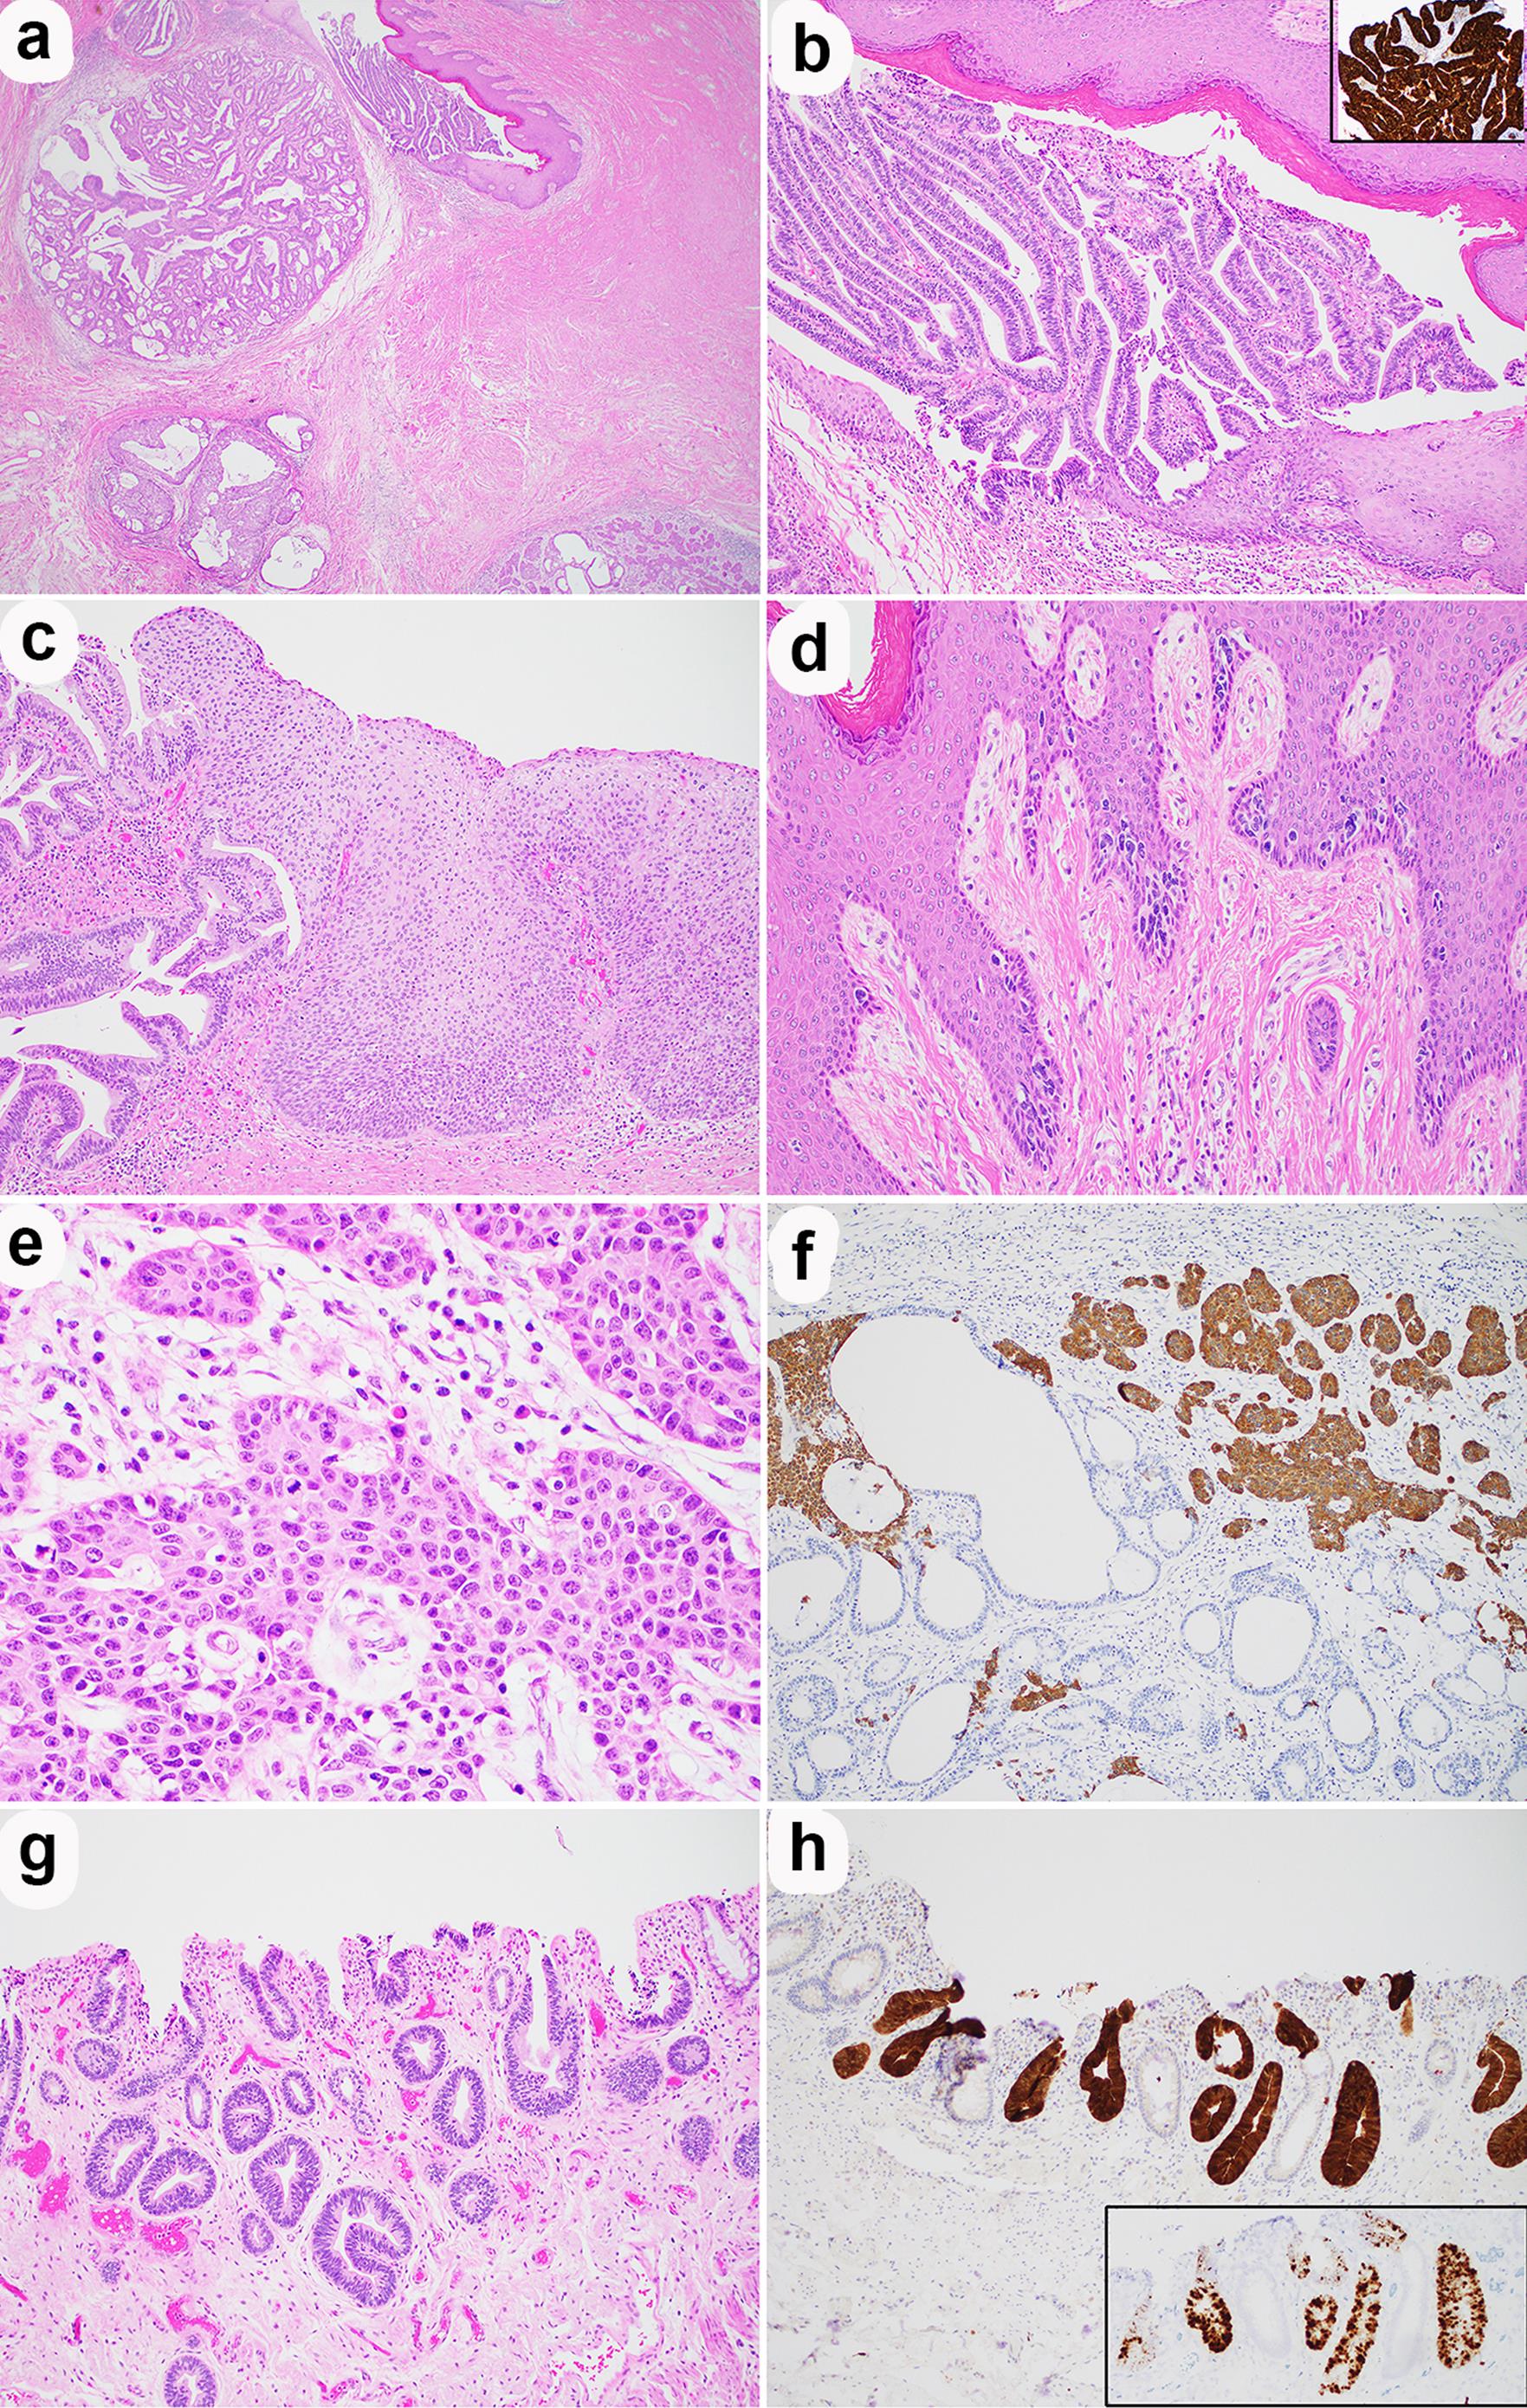 A unique case of HPV-associated adenocarcinoma in the anal canal.